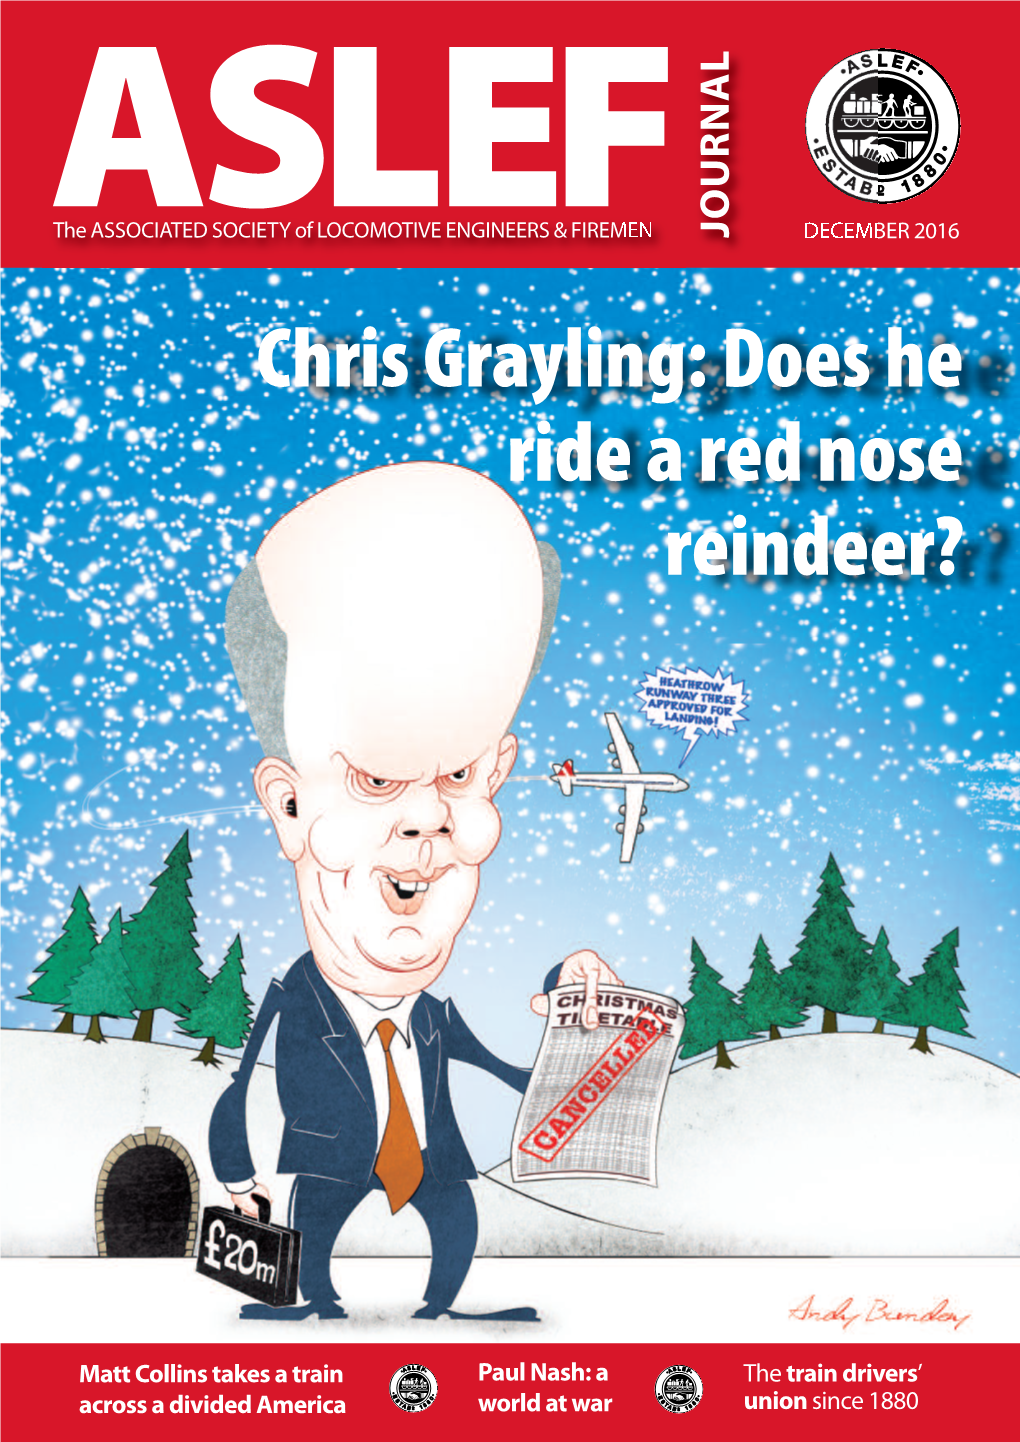 Chris Grayling: Does He Ride a Red Nose Reindeer?